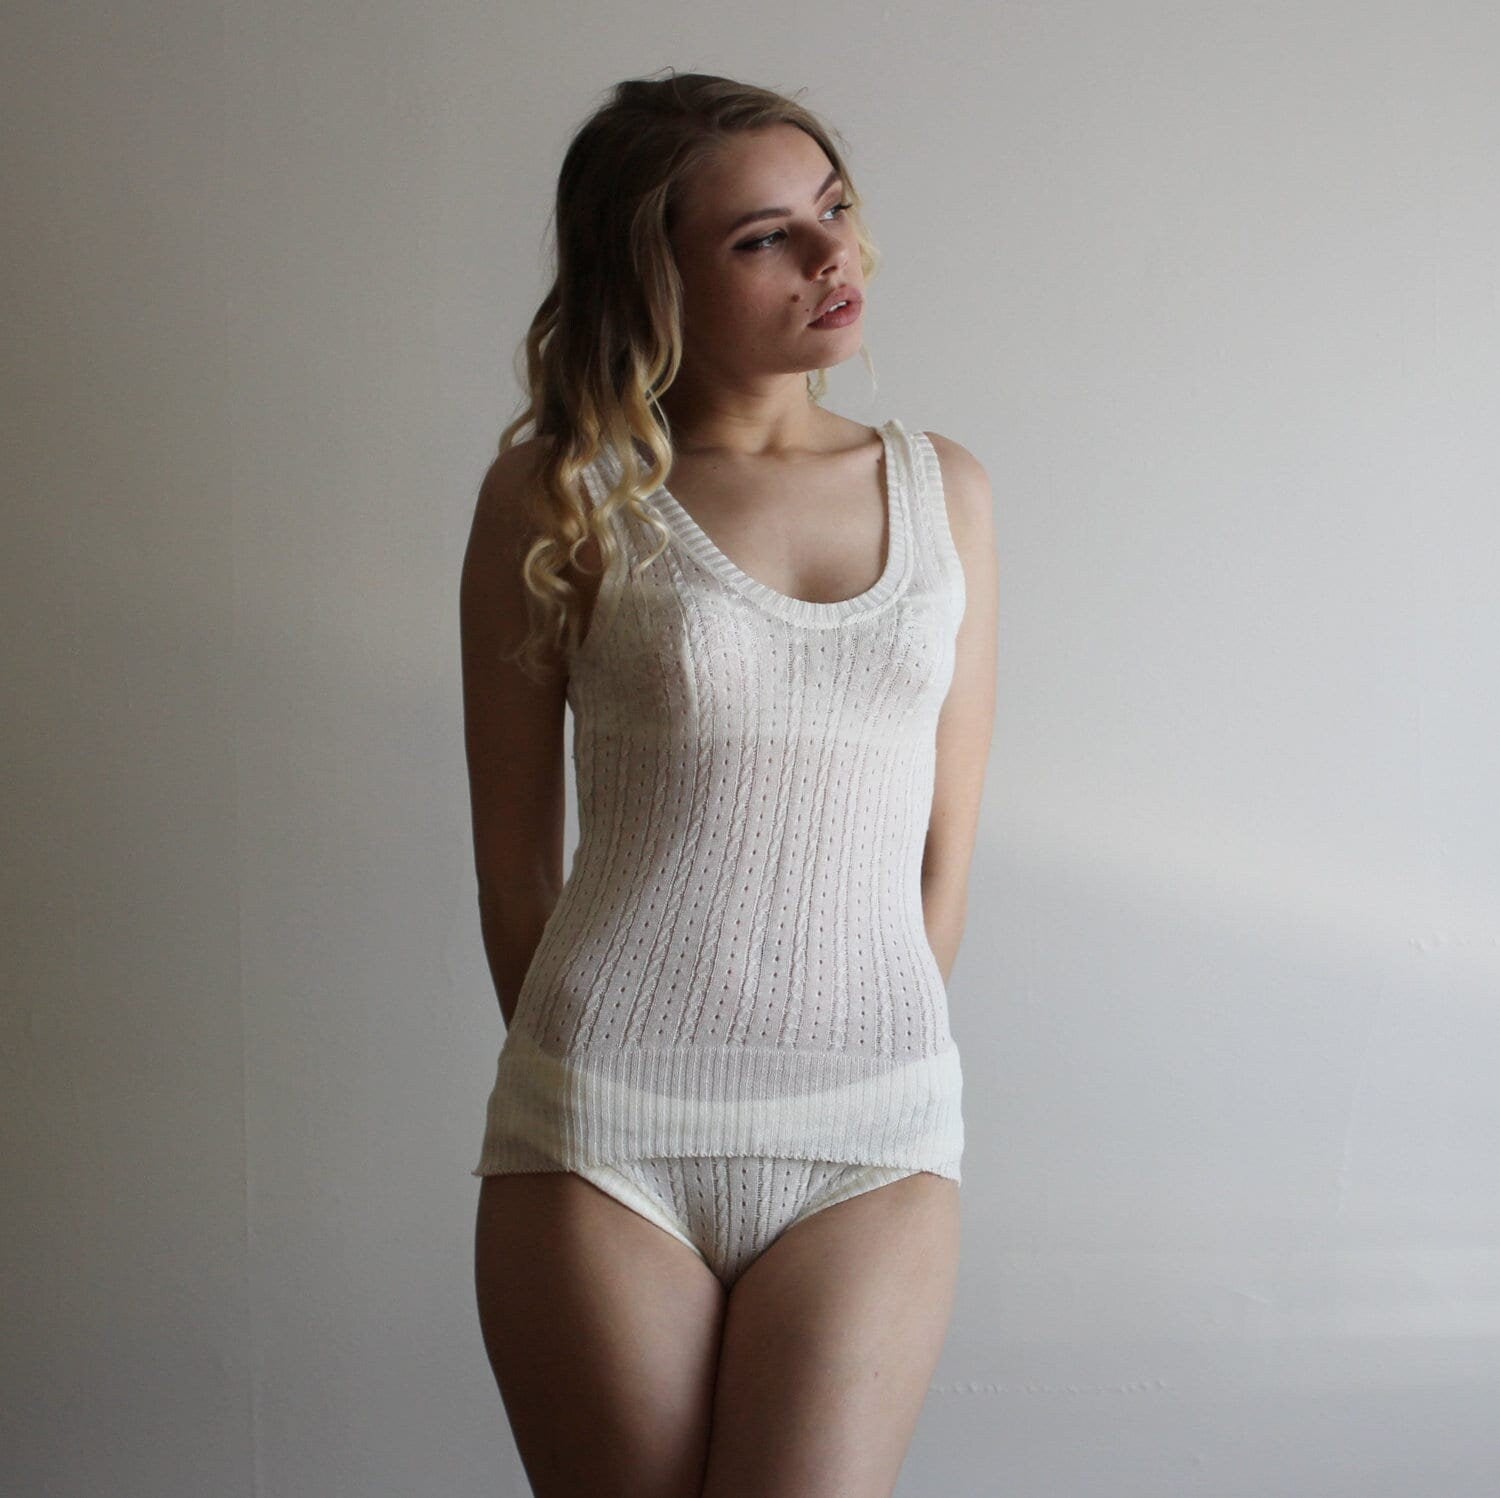 silk cashmere tank top in lacy pointelle, Ivory Camisole, Sheer Lingerie, Bridal Gift, Made to Order, Made in the USA